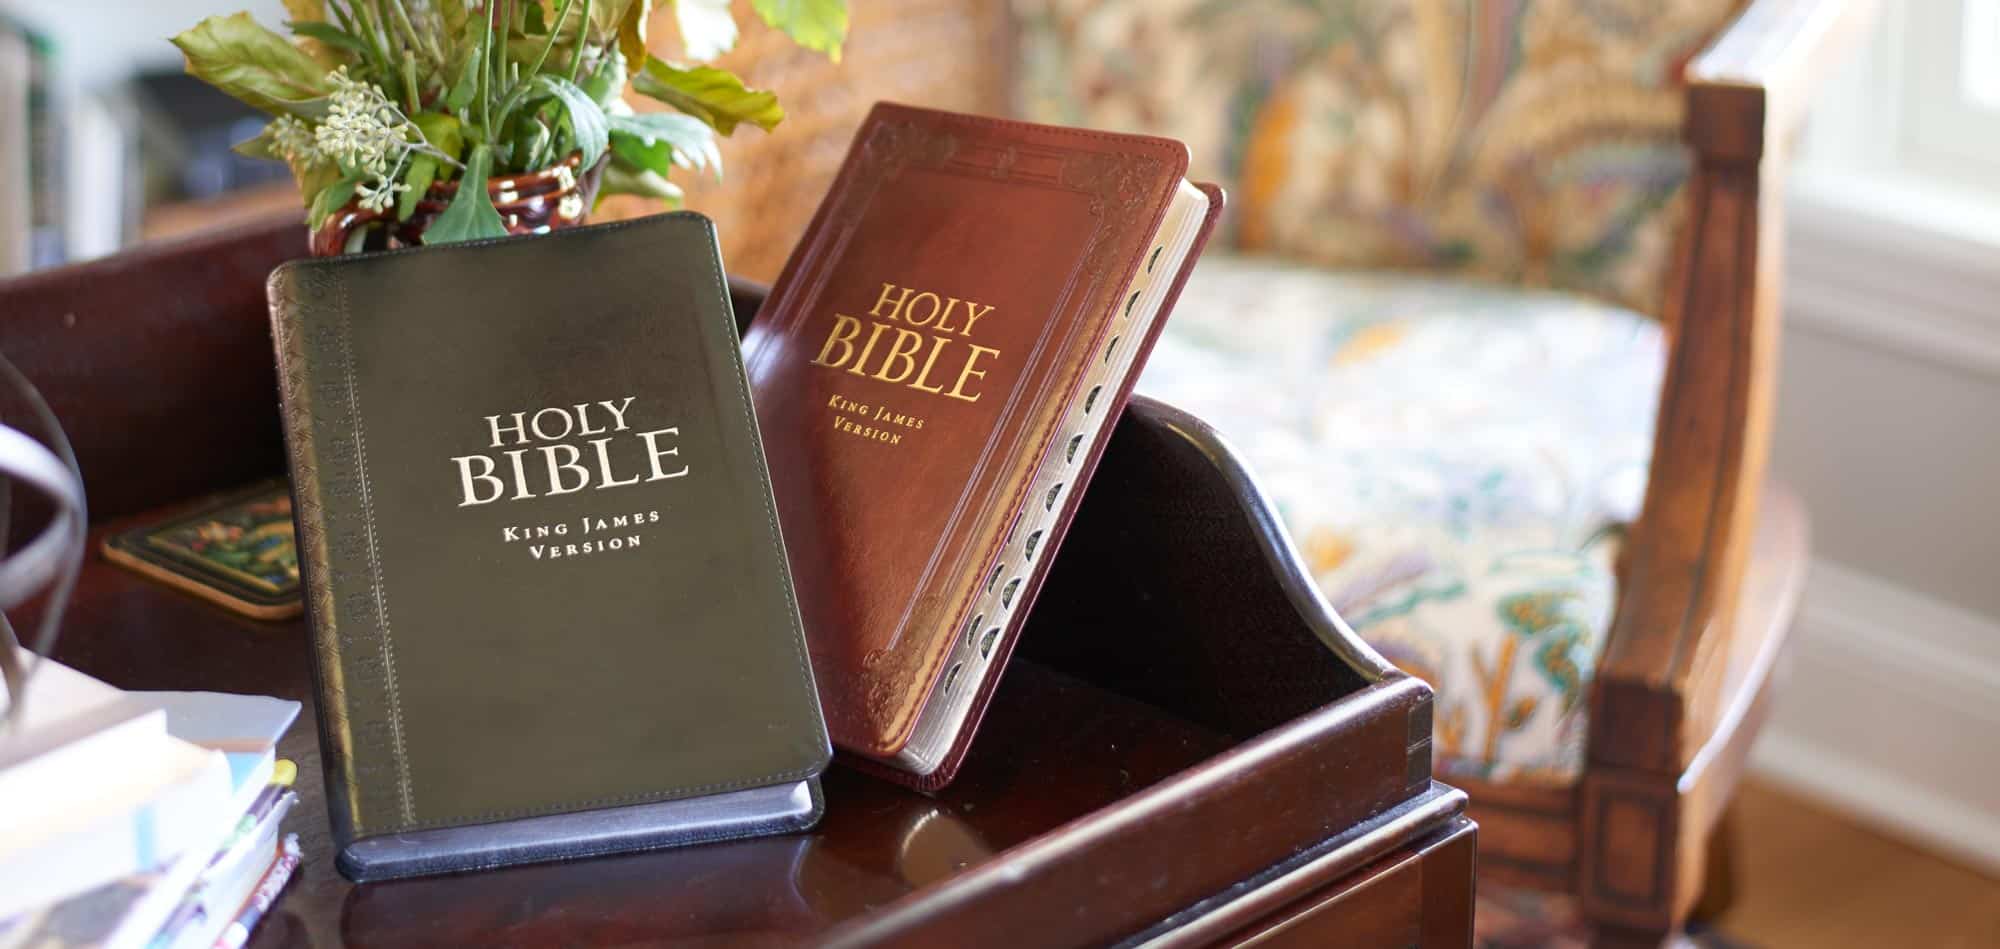 Two Bibles, one black and one brown, on a wooden table with a vase of greenery and chair in the blurred background